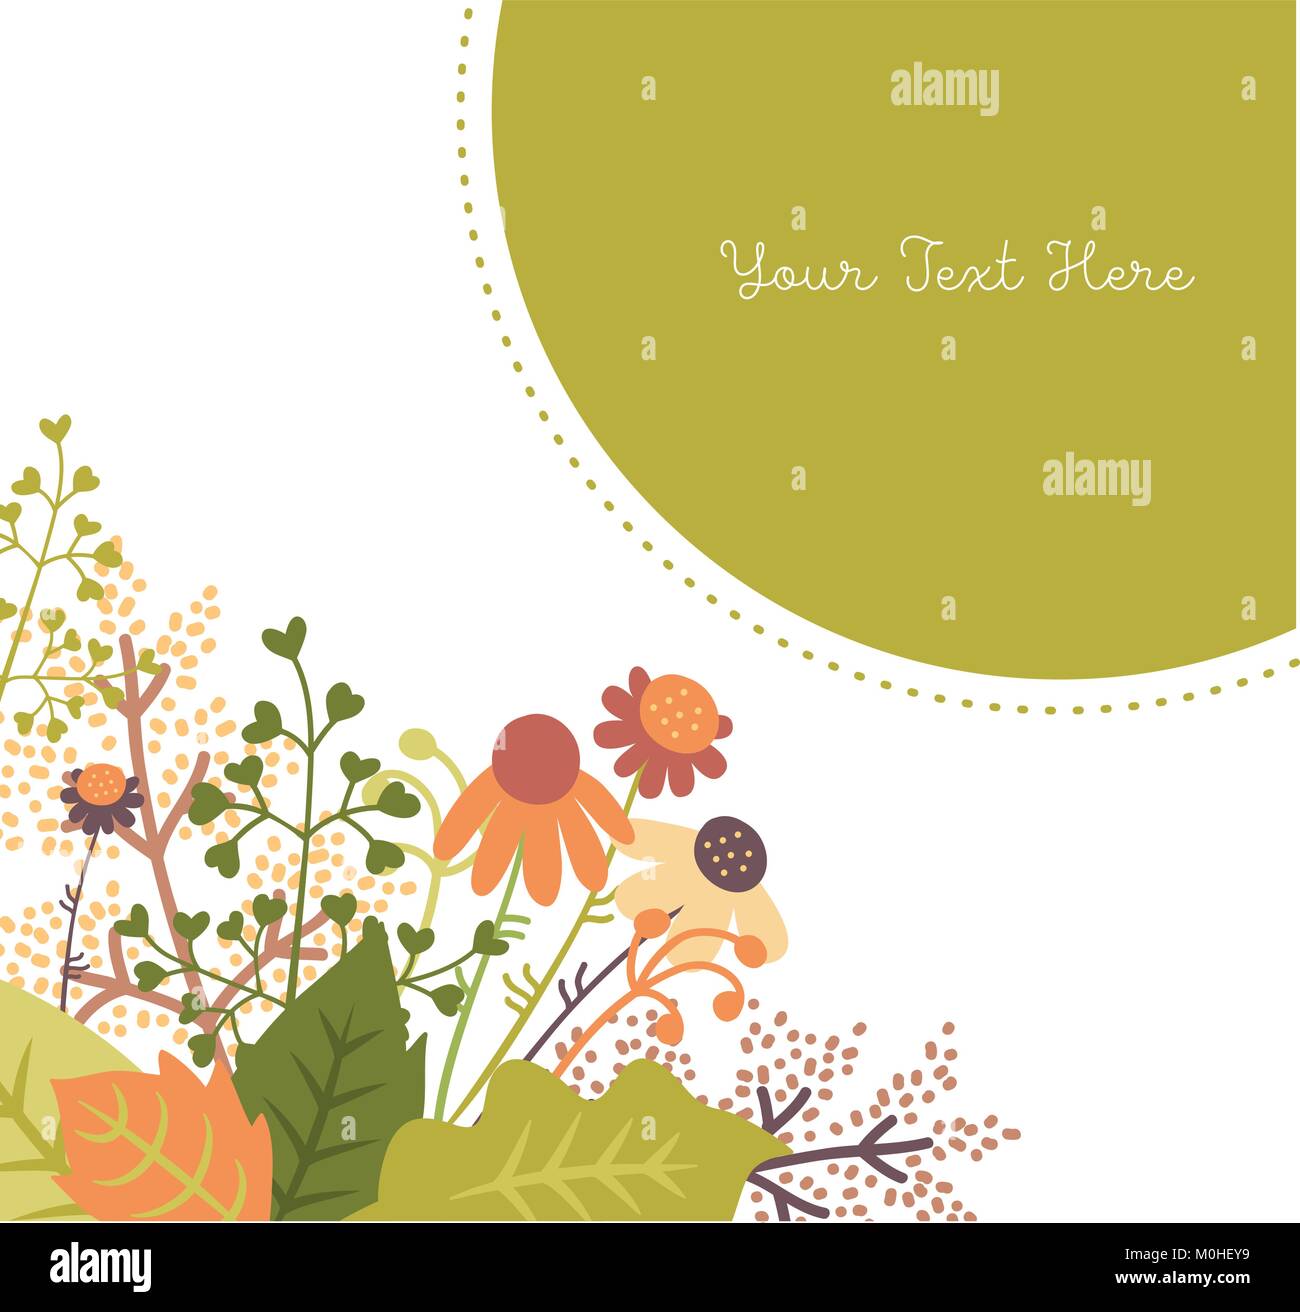 Floral invitation/greeting/thank you/event card vector template Stock Vector